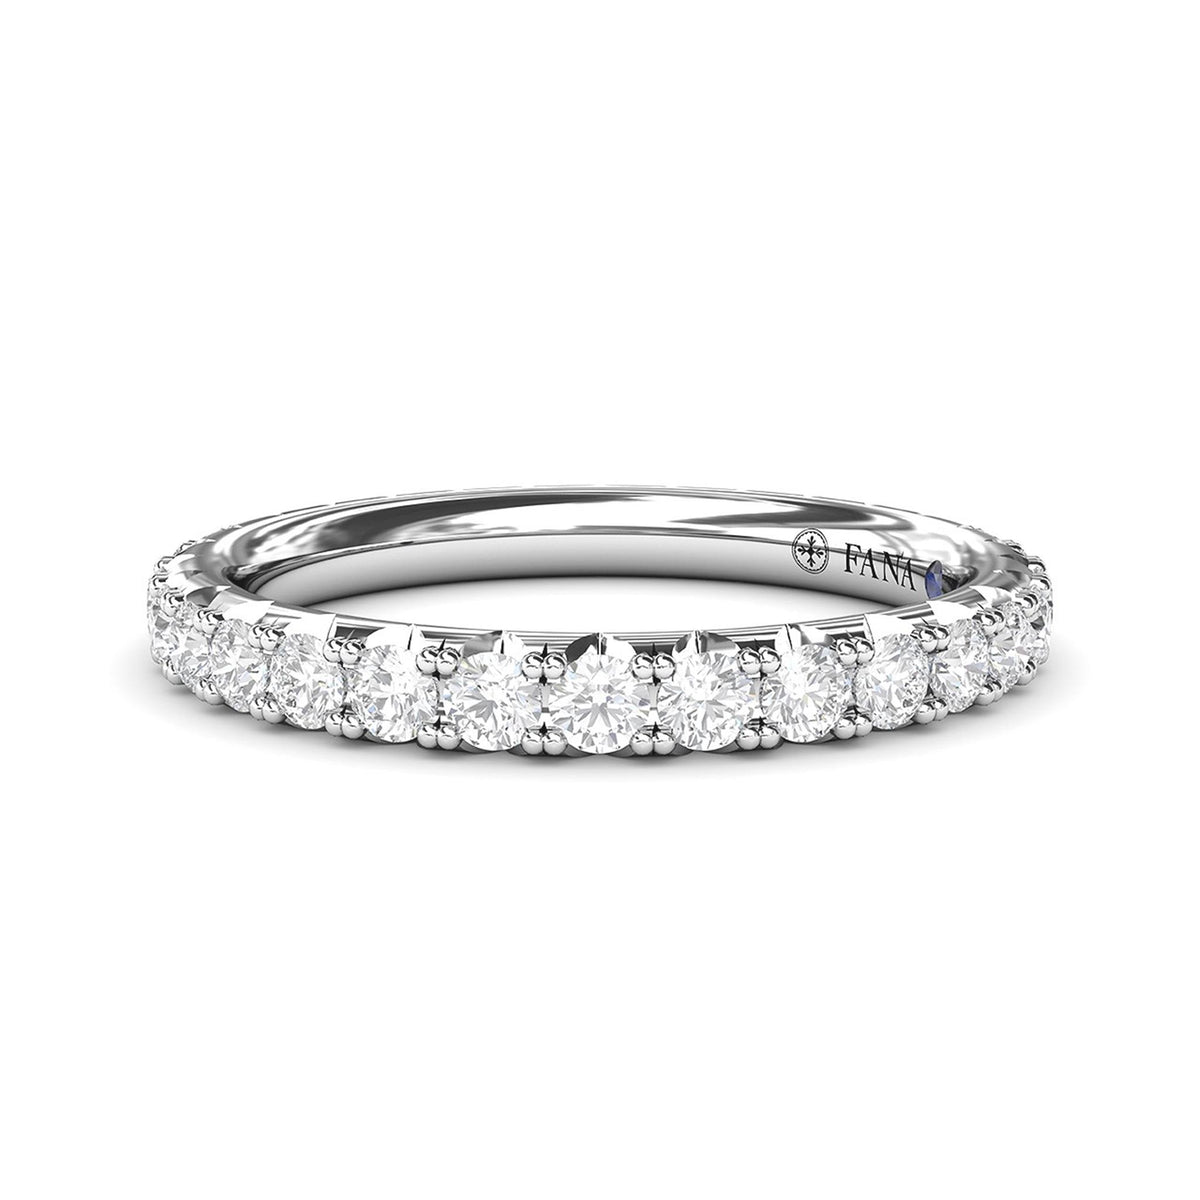 14Kt White Gold Eternity Wedding Ring With 1.05cttw Natural Diamonds